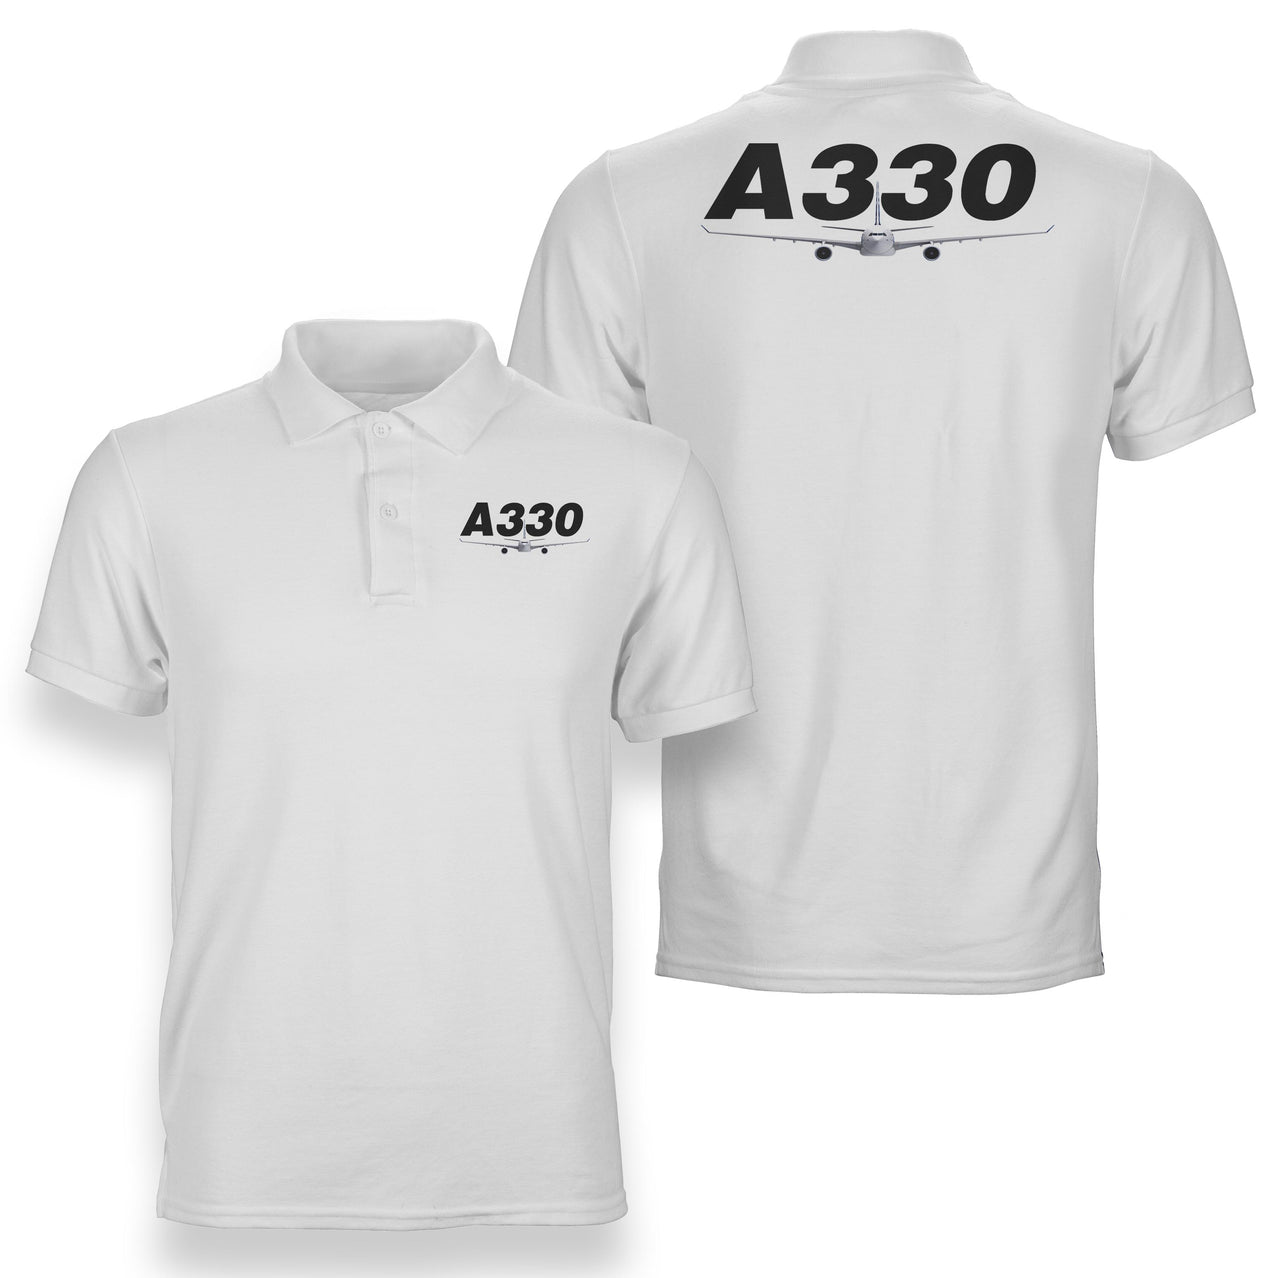 Super Airbus A330 Designed Double Side Polo T-Shirts